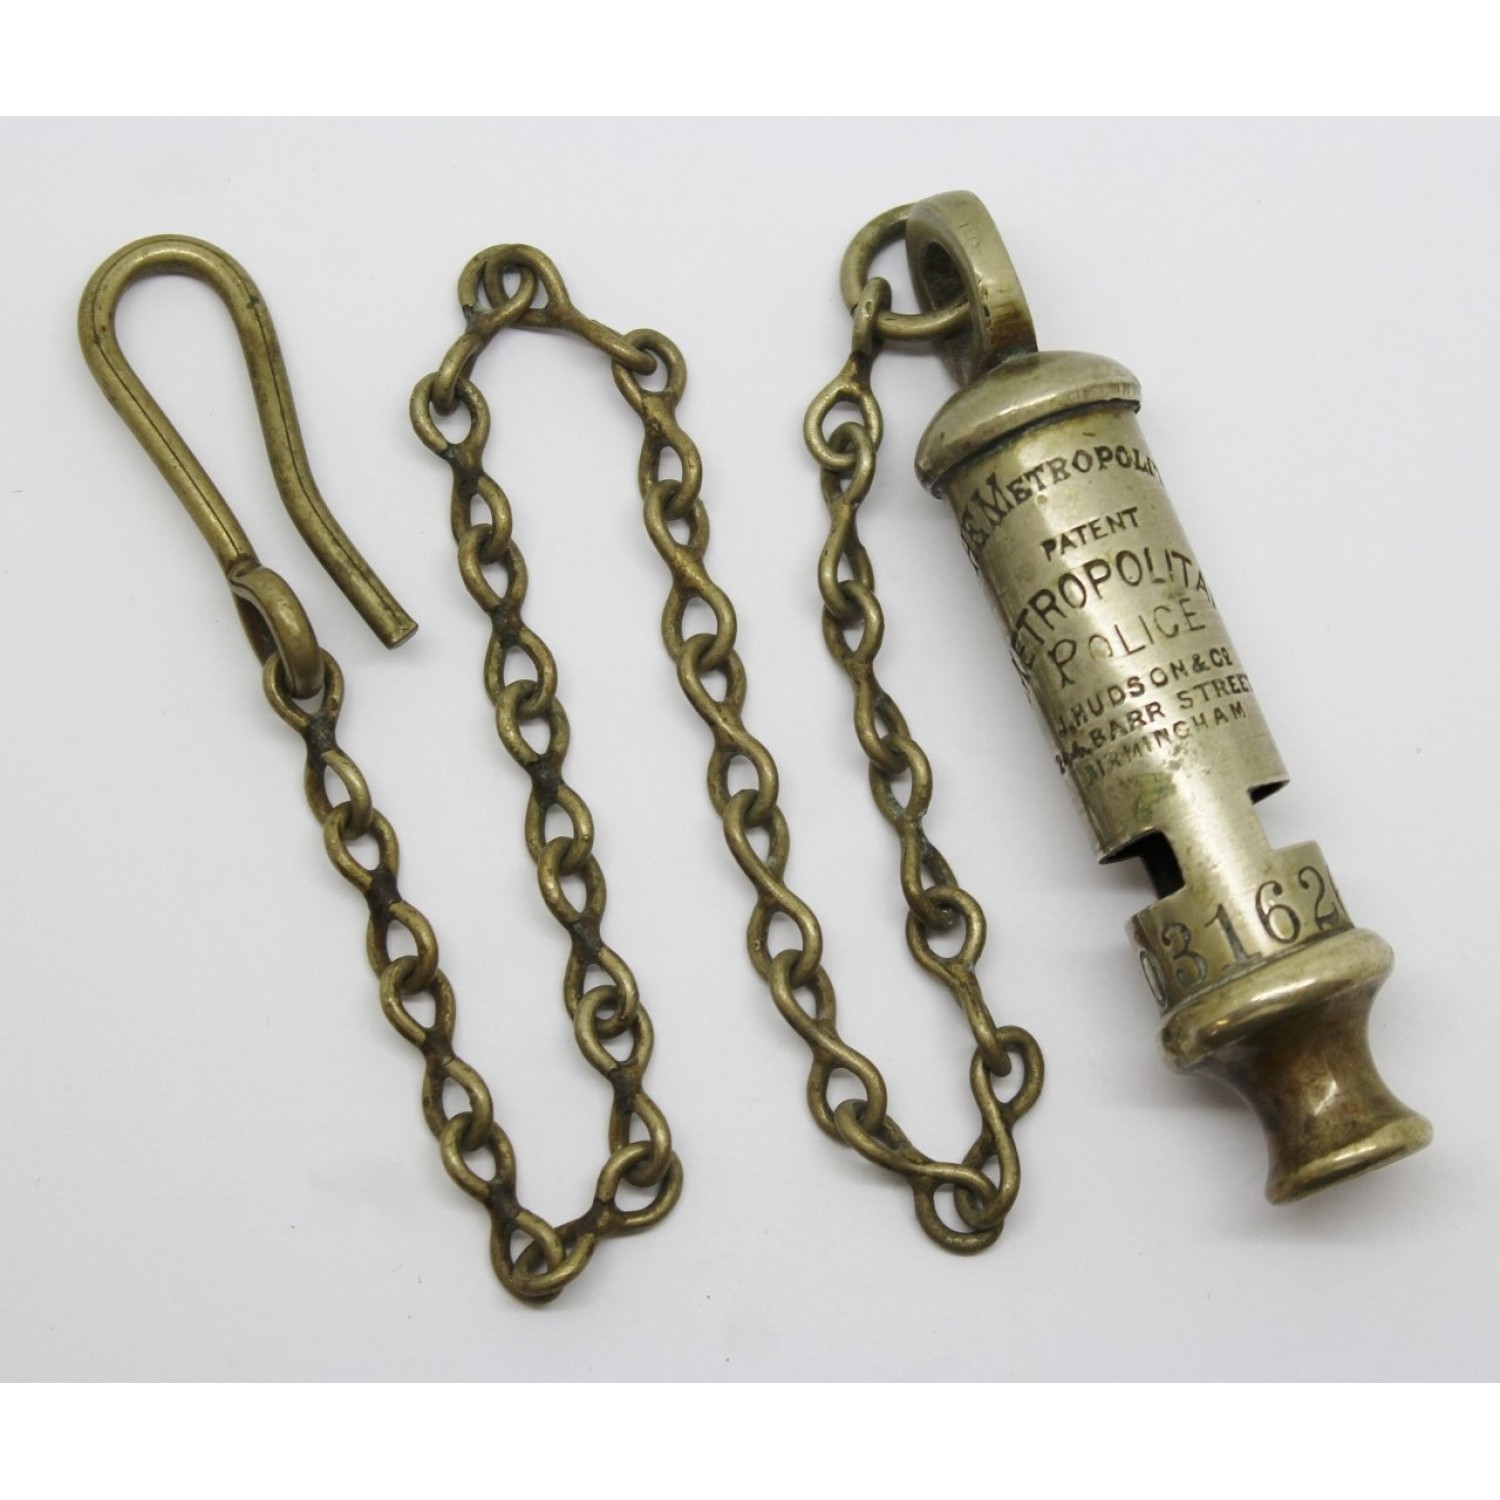 Metropolitan Police 'The Metropolitan' Patent Numbered Whistle & Chain ...